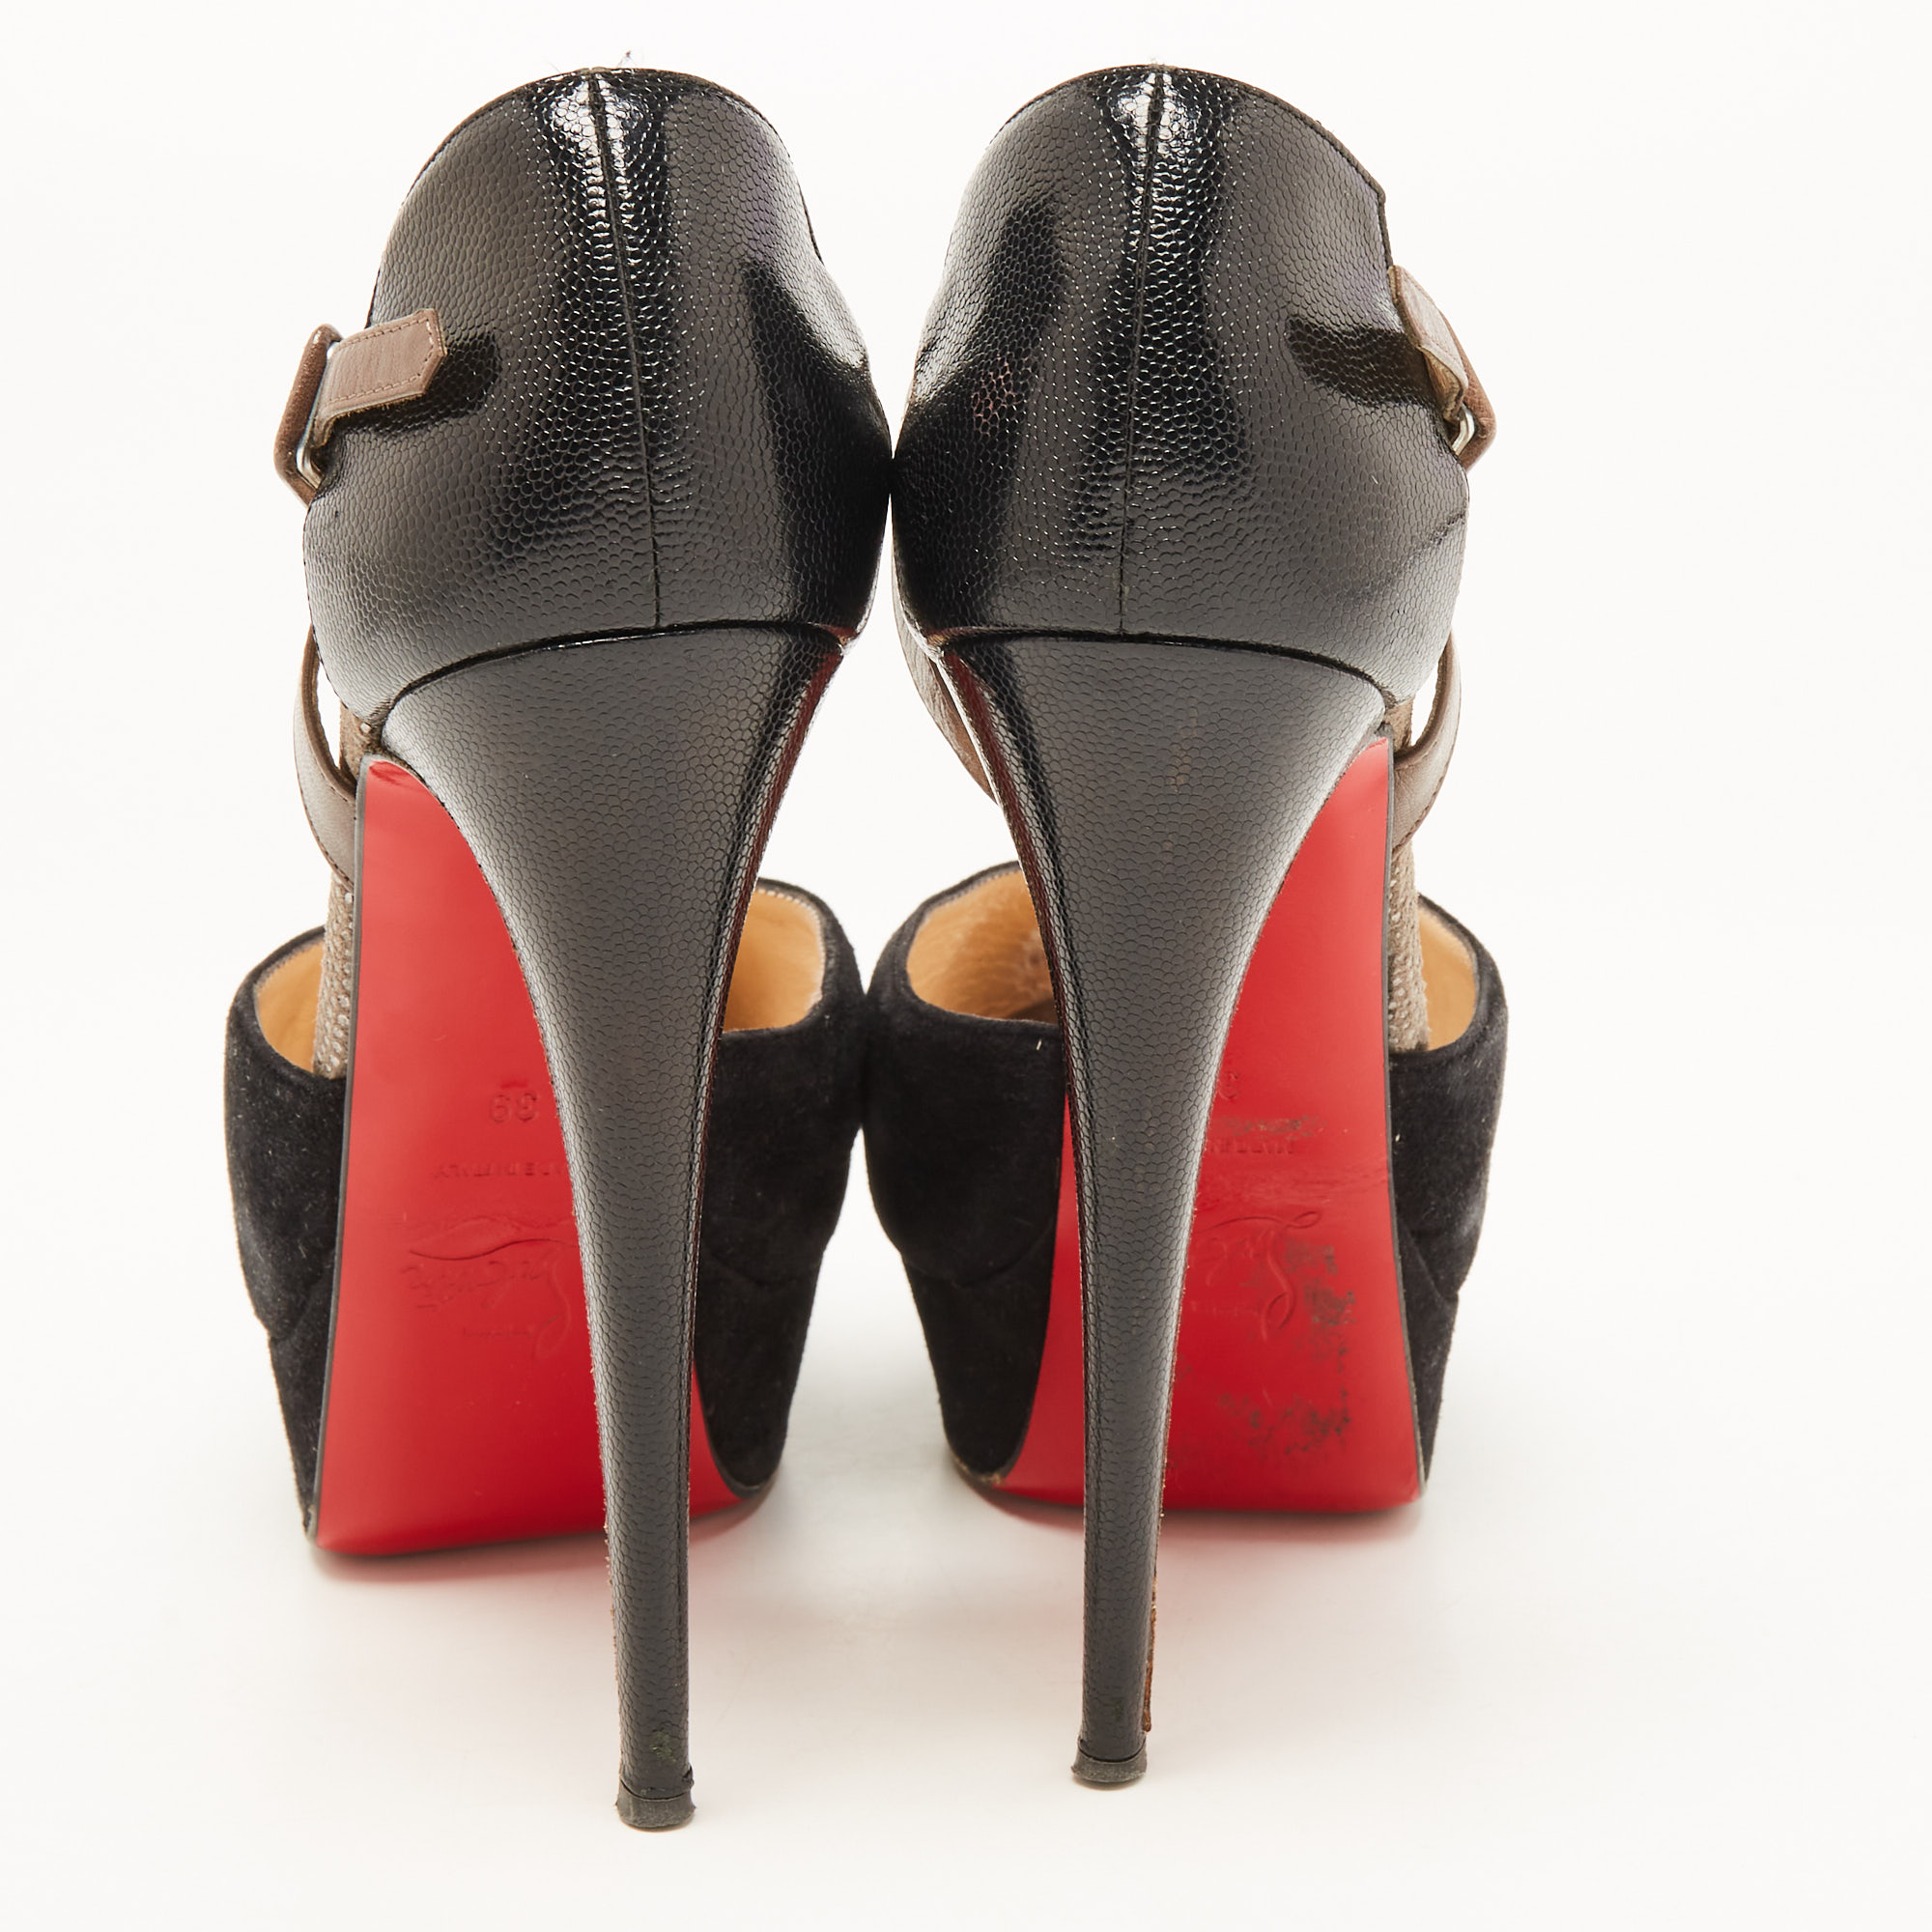 Christian Louboutin Black/Grey Suede And Leather Peep Toe Ankle Strap Platform Sandals Size 39